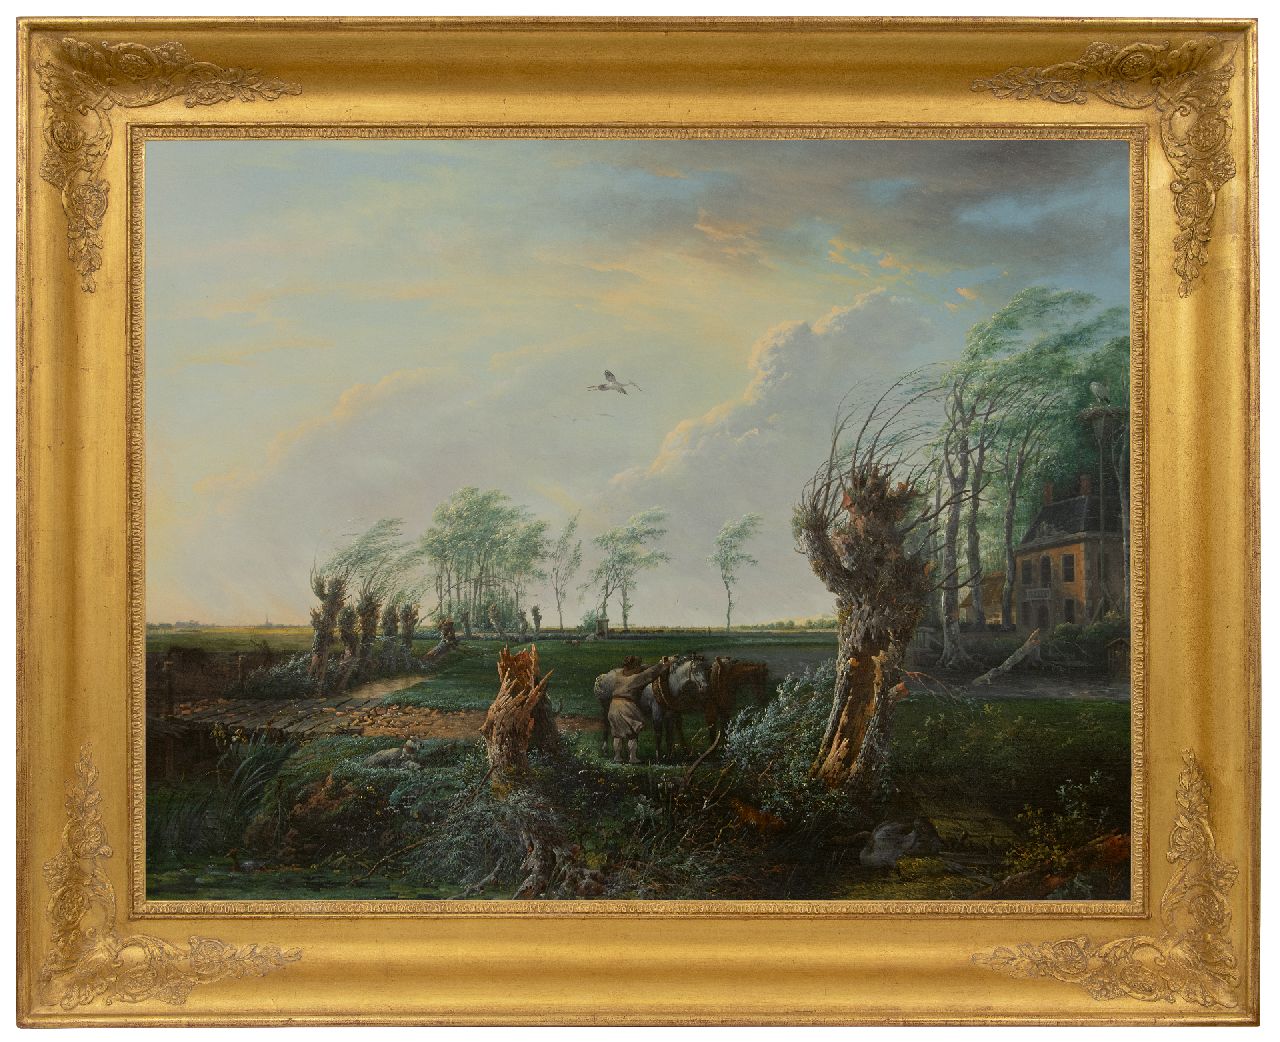 Nijmegen G. van | Gerard van Nijmegen | Paintings offered for sale | A farmer with his horses in a stormy landscape, oil on panel 68.8 x 89.7 cm, signed with initials